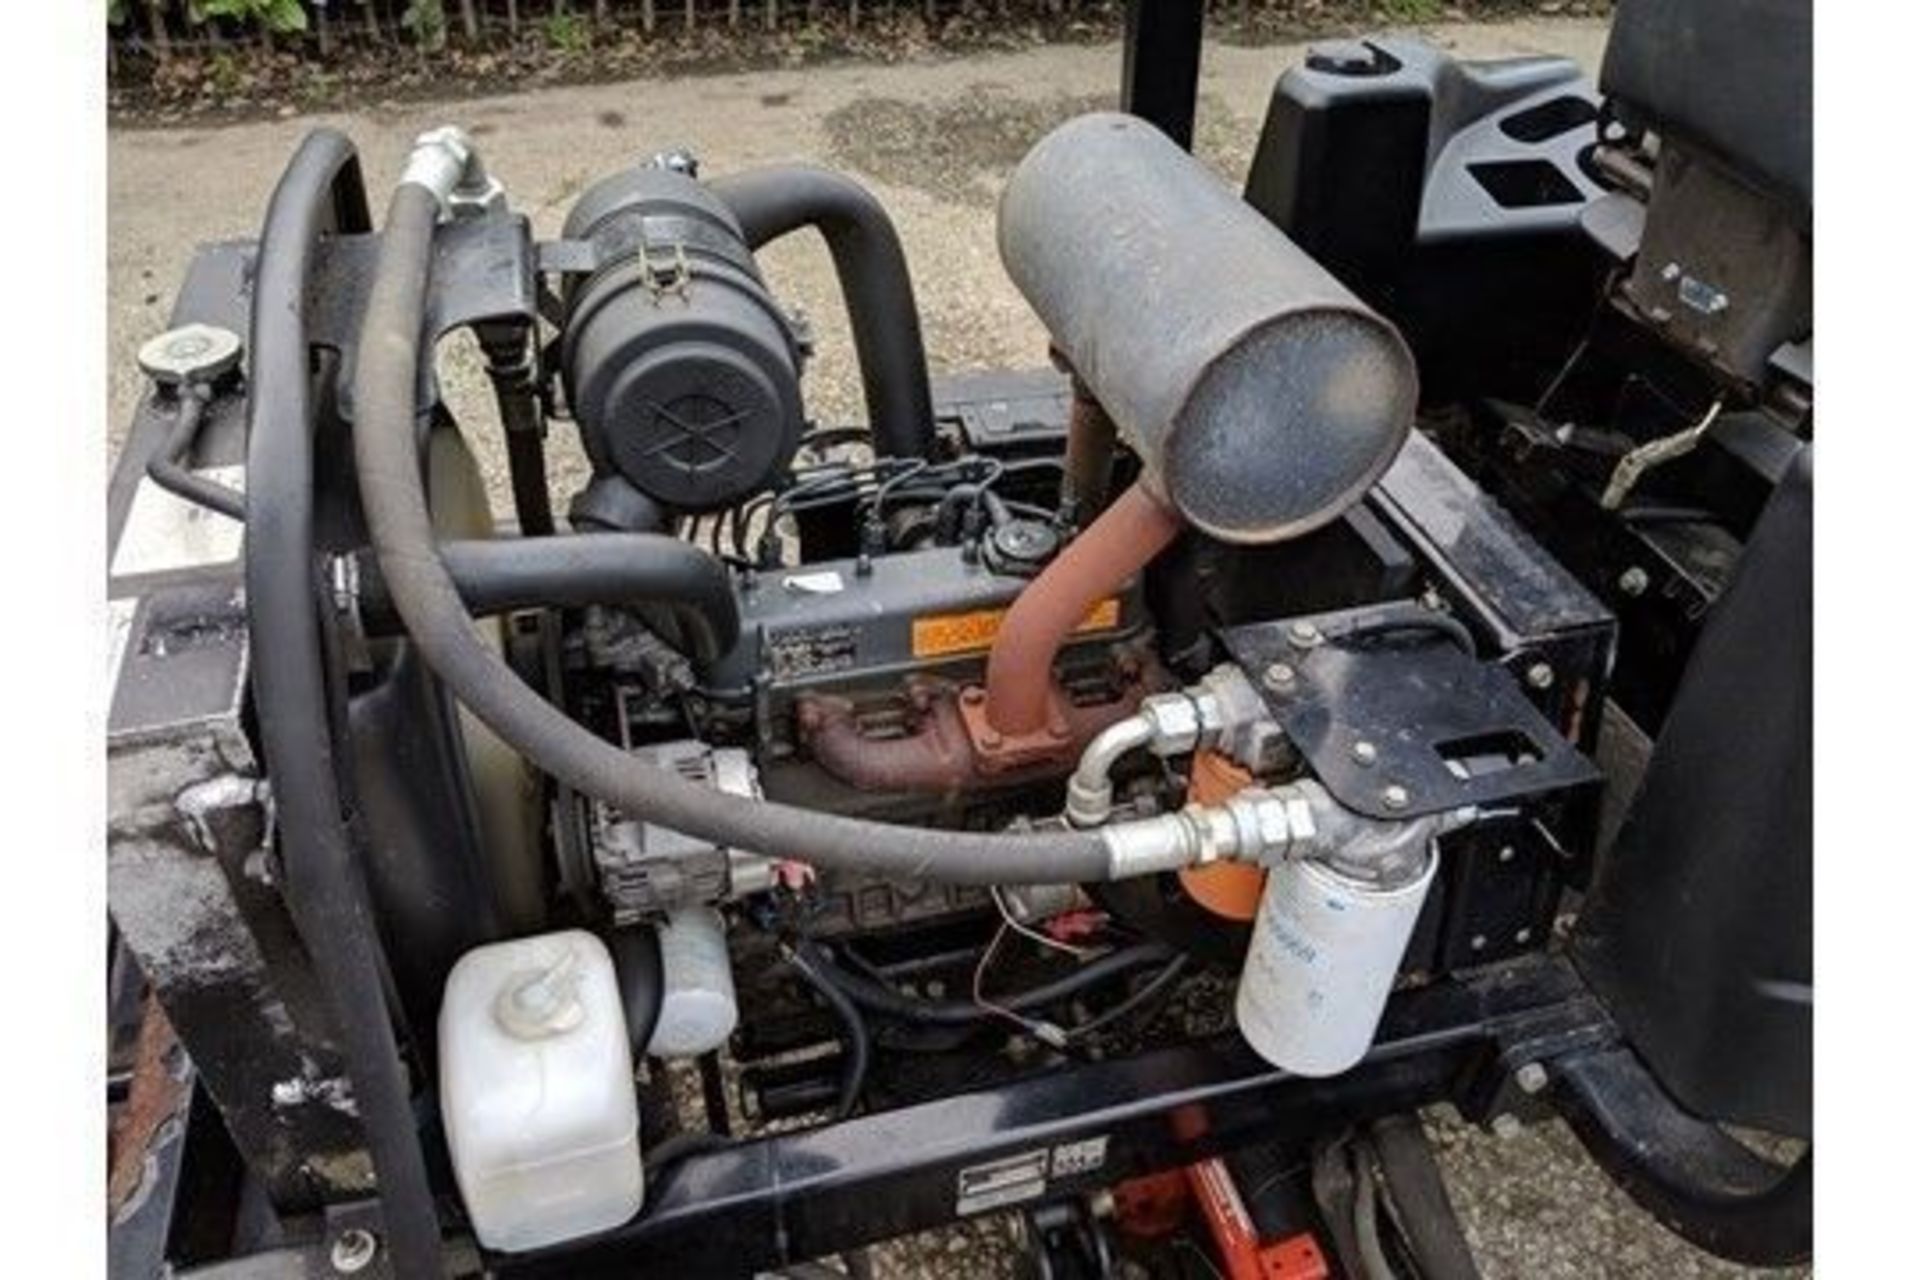 2007 Ransomes Jacobsen LF3800 4WD Cylinder Mower - Image 8 of 8